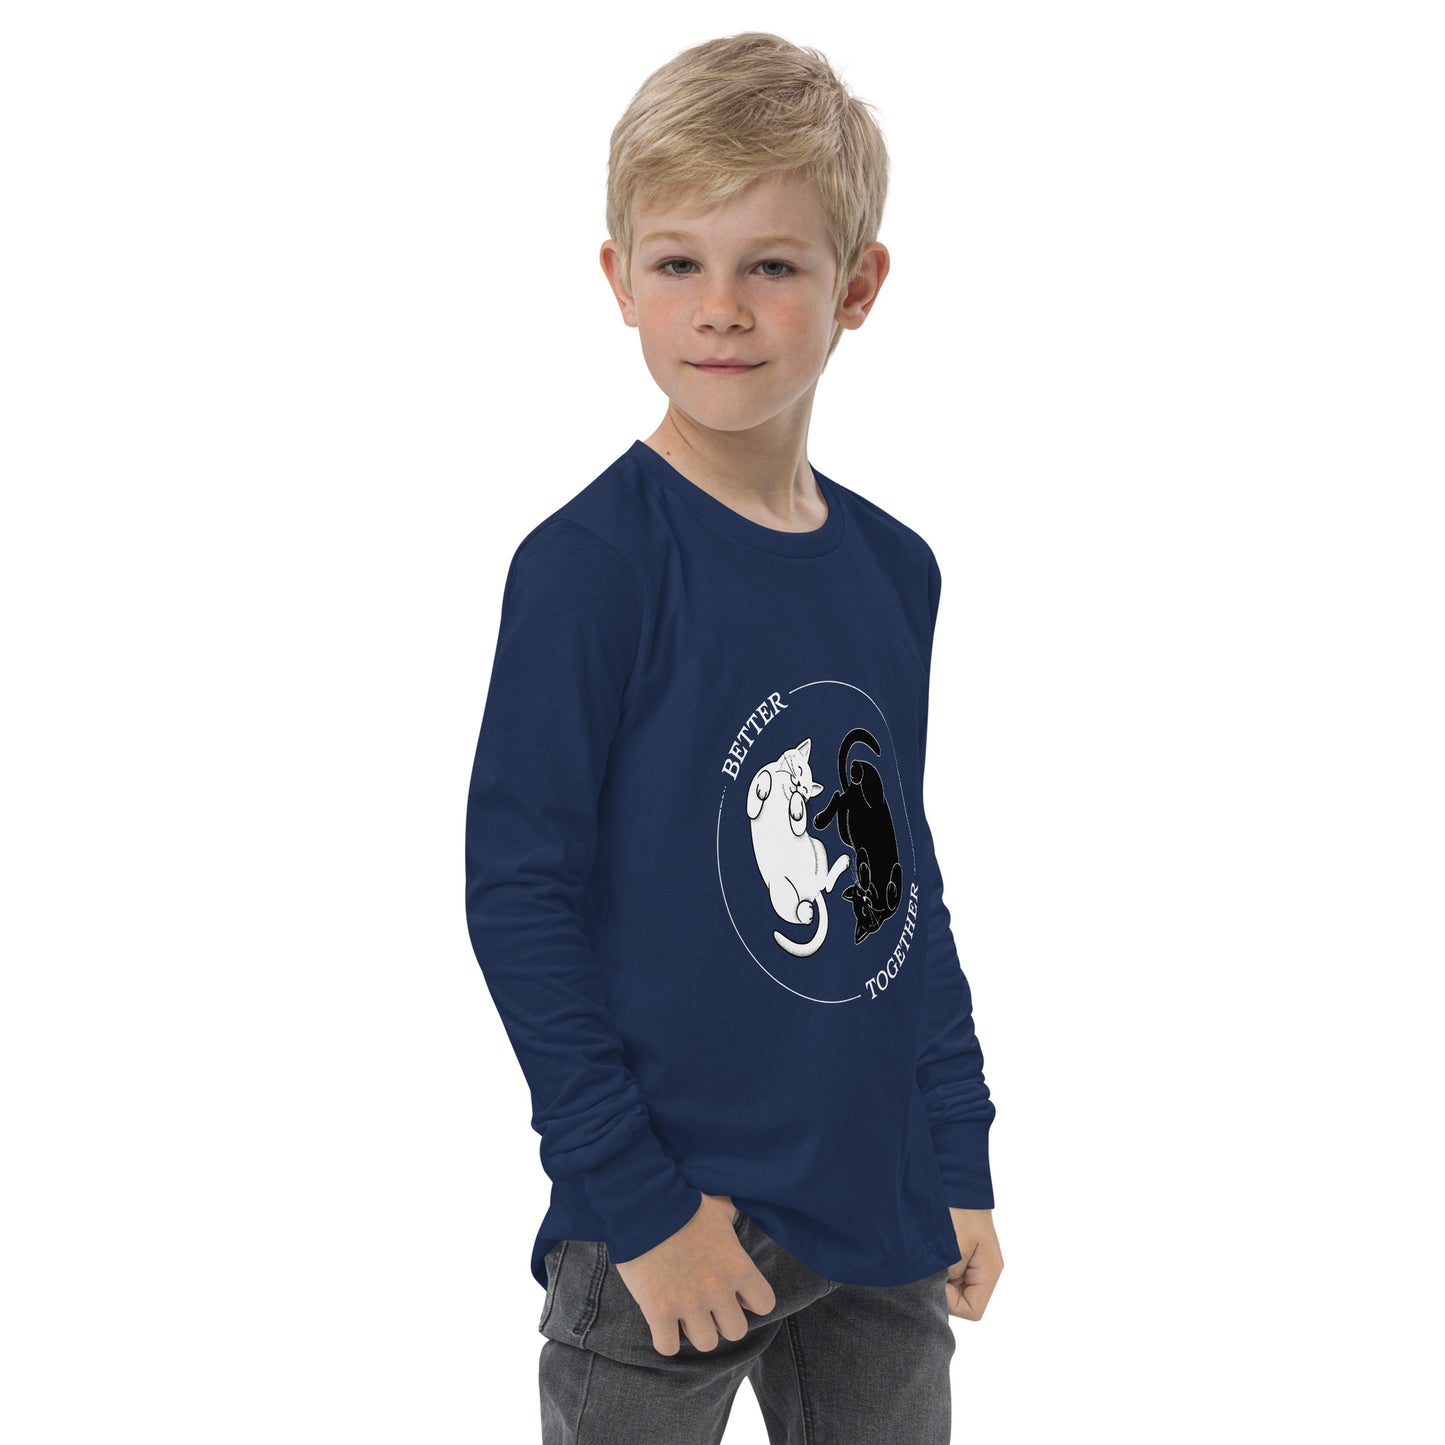 Youth Bonded Pair Long Sleeve